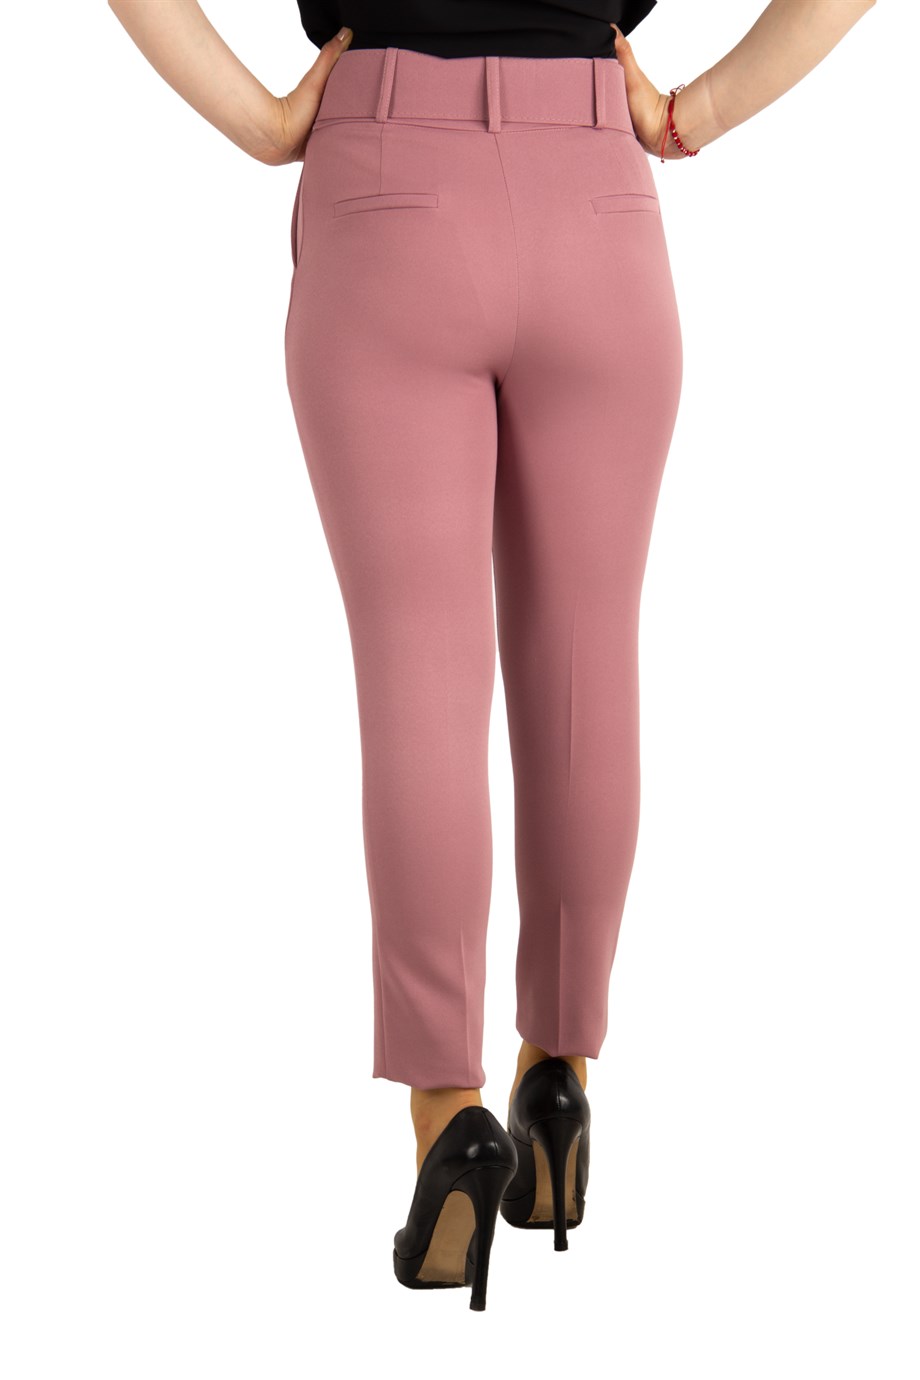 Buy FOREVER NEW Lilac Solid Regular Fit Blended Women's Formal Wear Pant |  Shoppers Stop